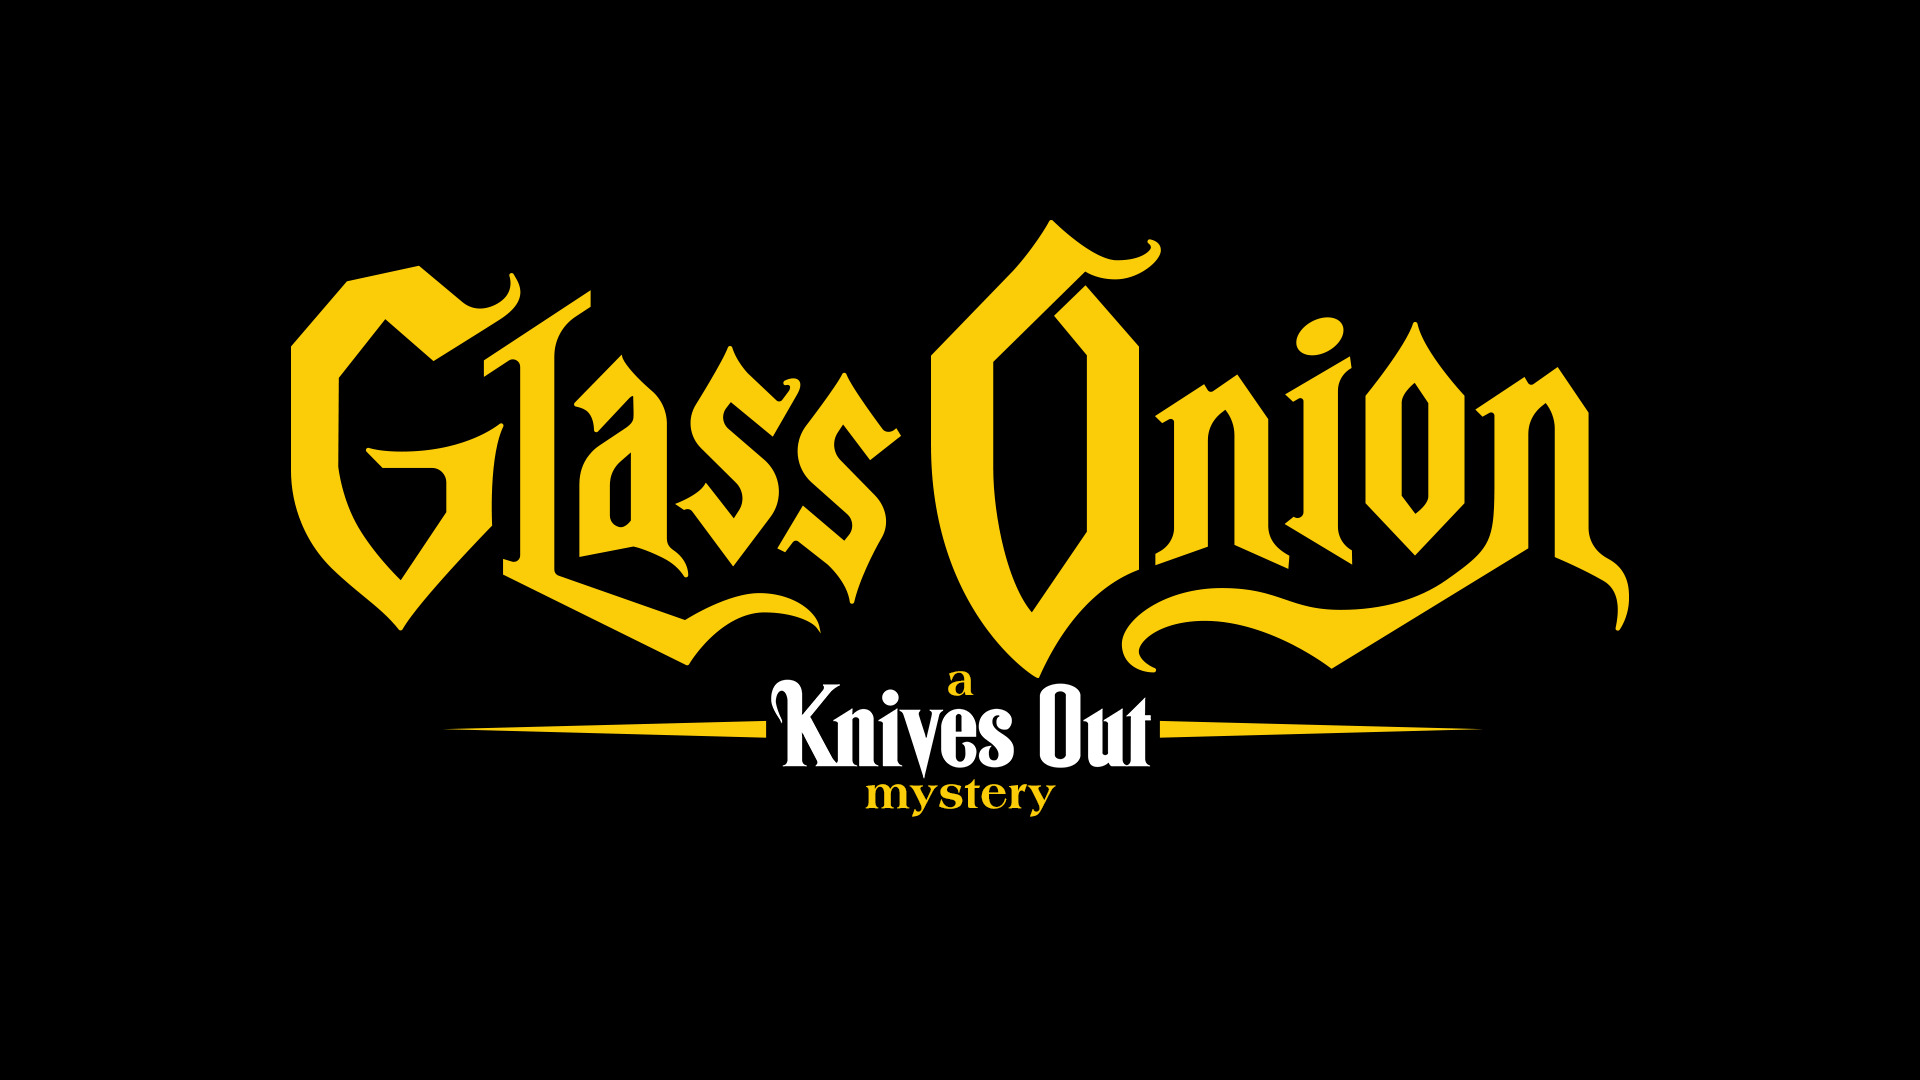 41-facts-about-the-movie-glass-onion-a-knives-out-mystery